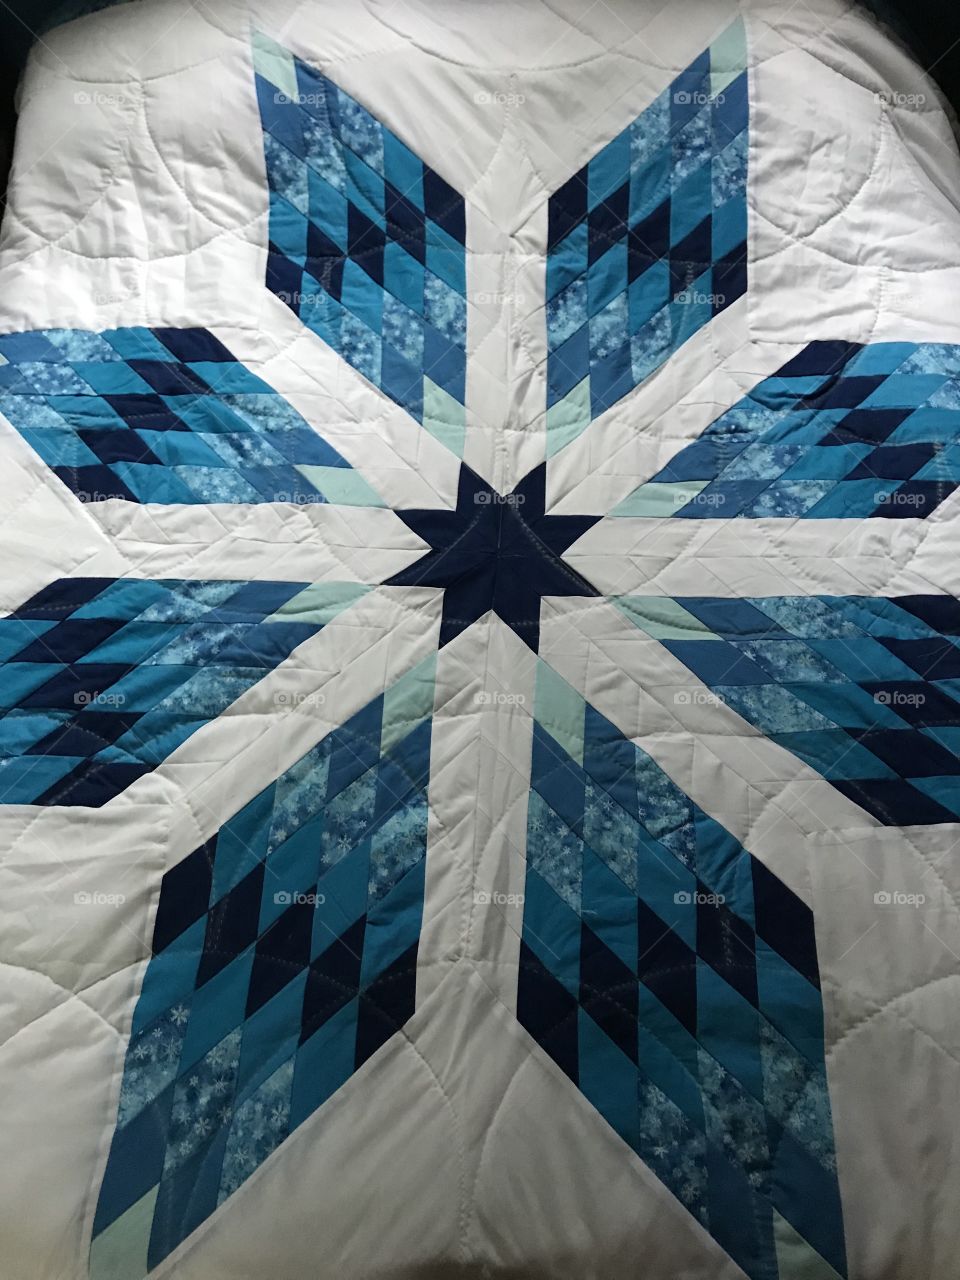 Lakota made crafted starquilt on the Rosebud Reservation